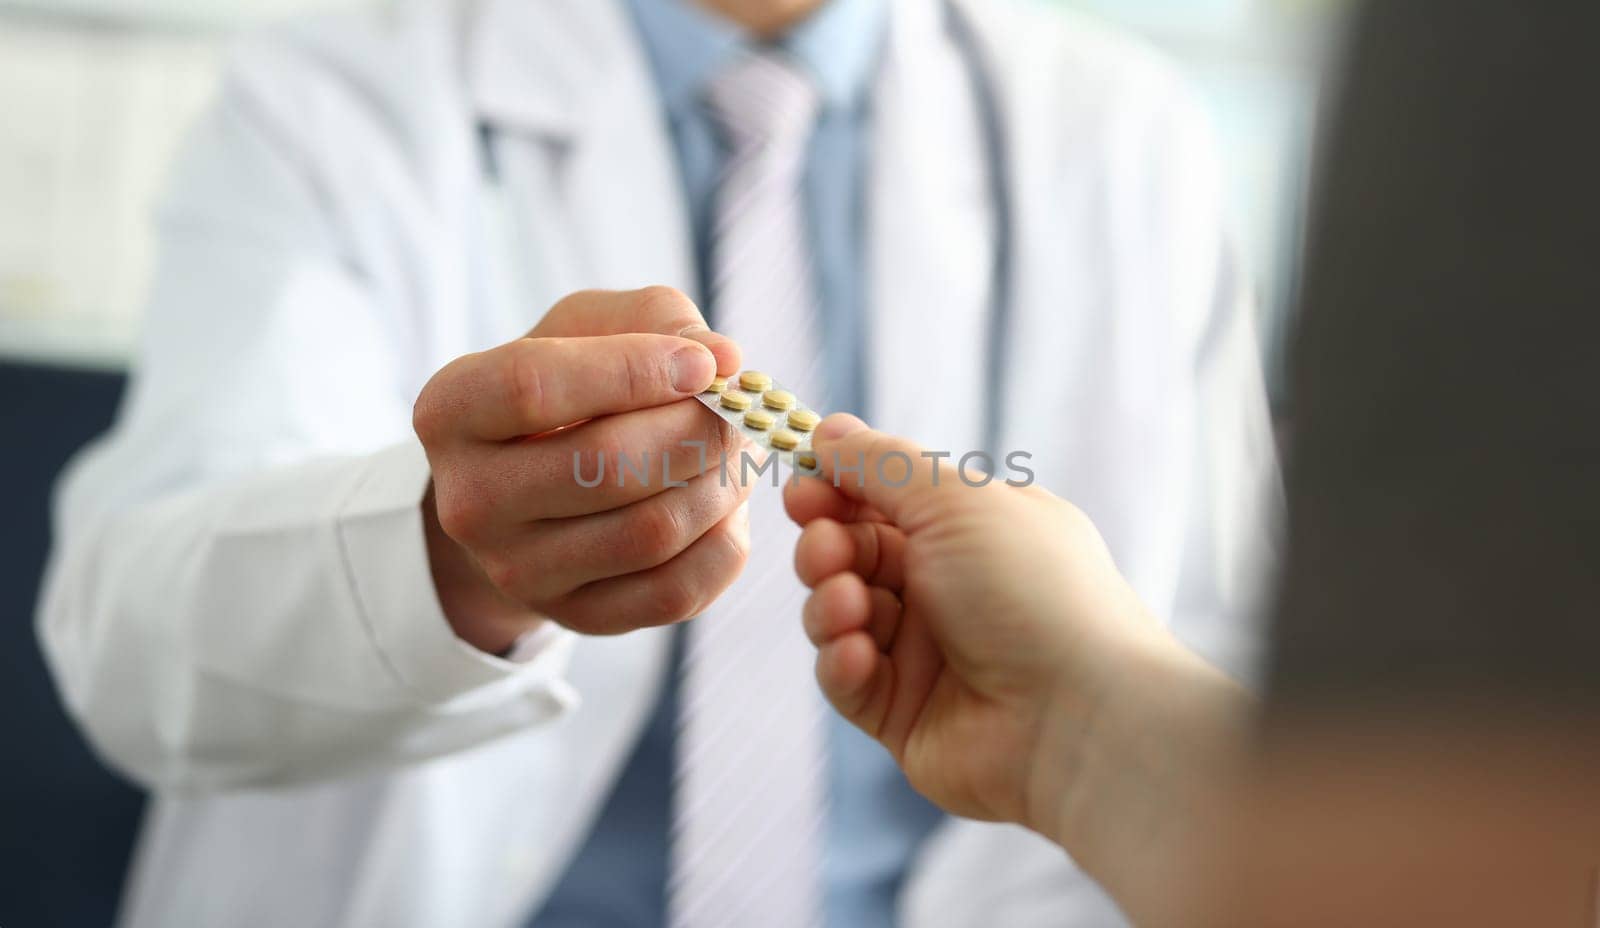 Closeup of doctor hand giving medical pills to patient. Prescribing medications to patient in illness concept